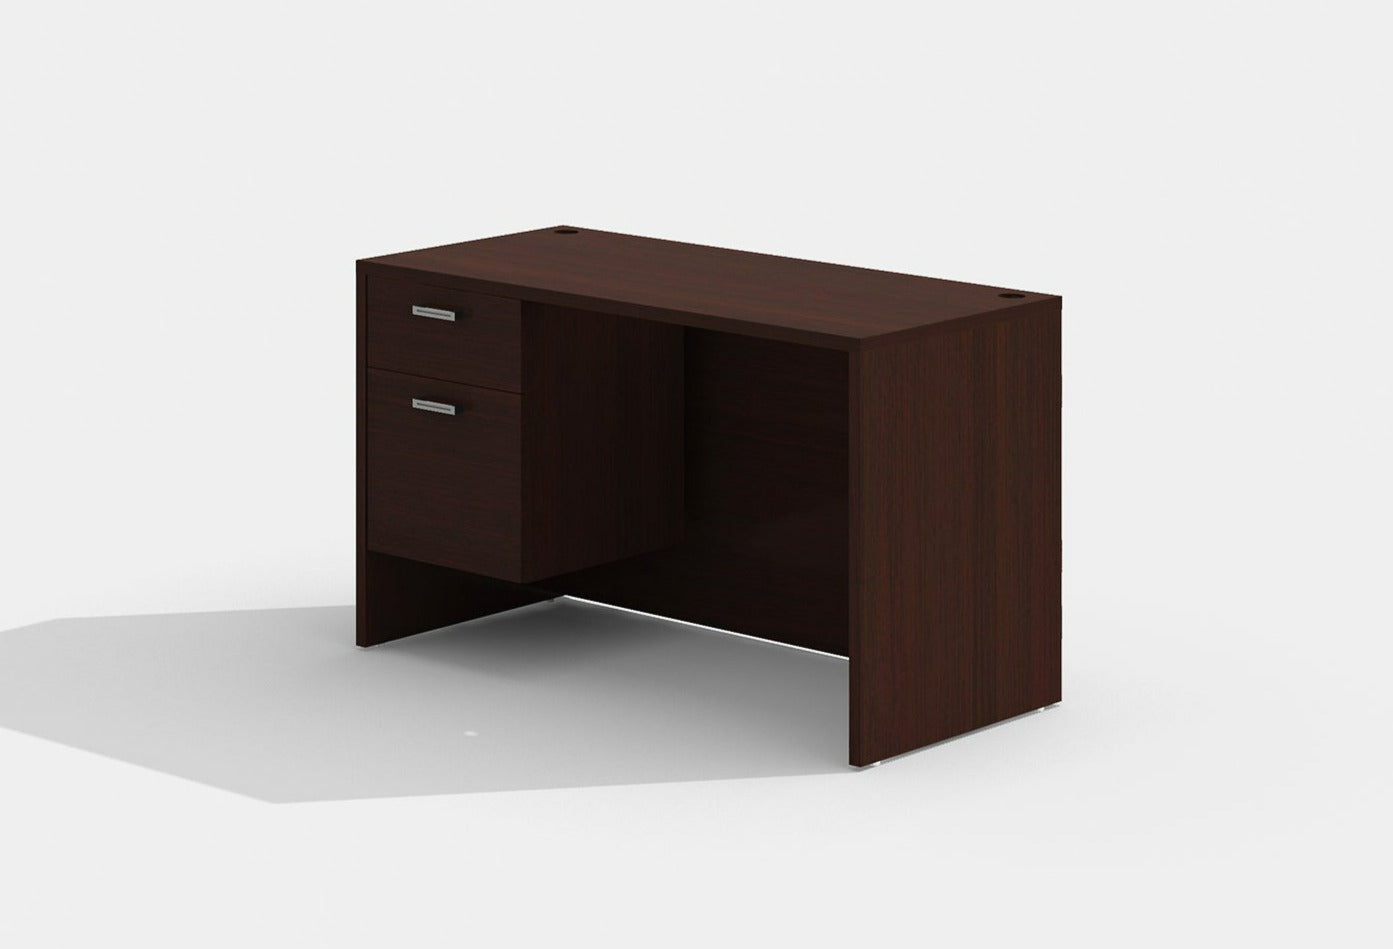 Amber Executive Office Desk w/ Single Suspended Storage by Cherryman Industries